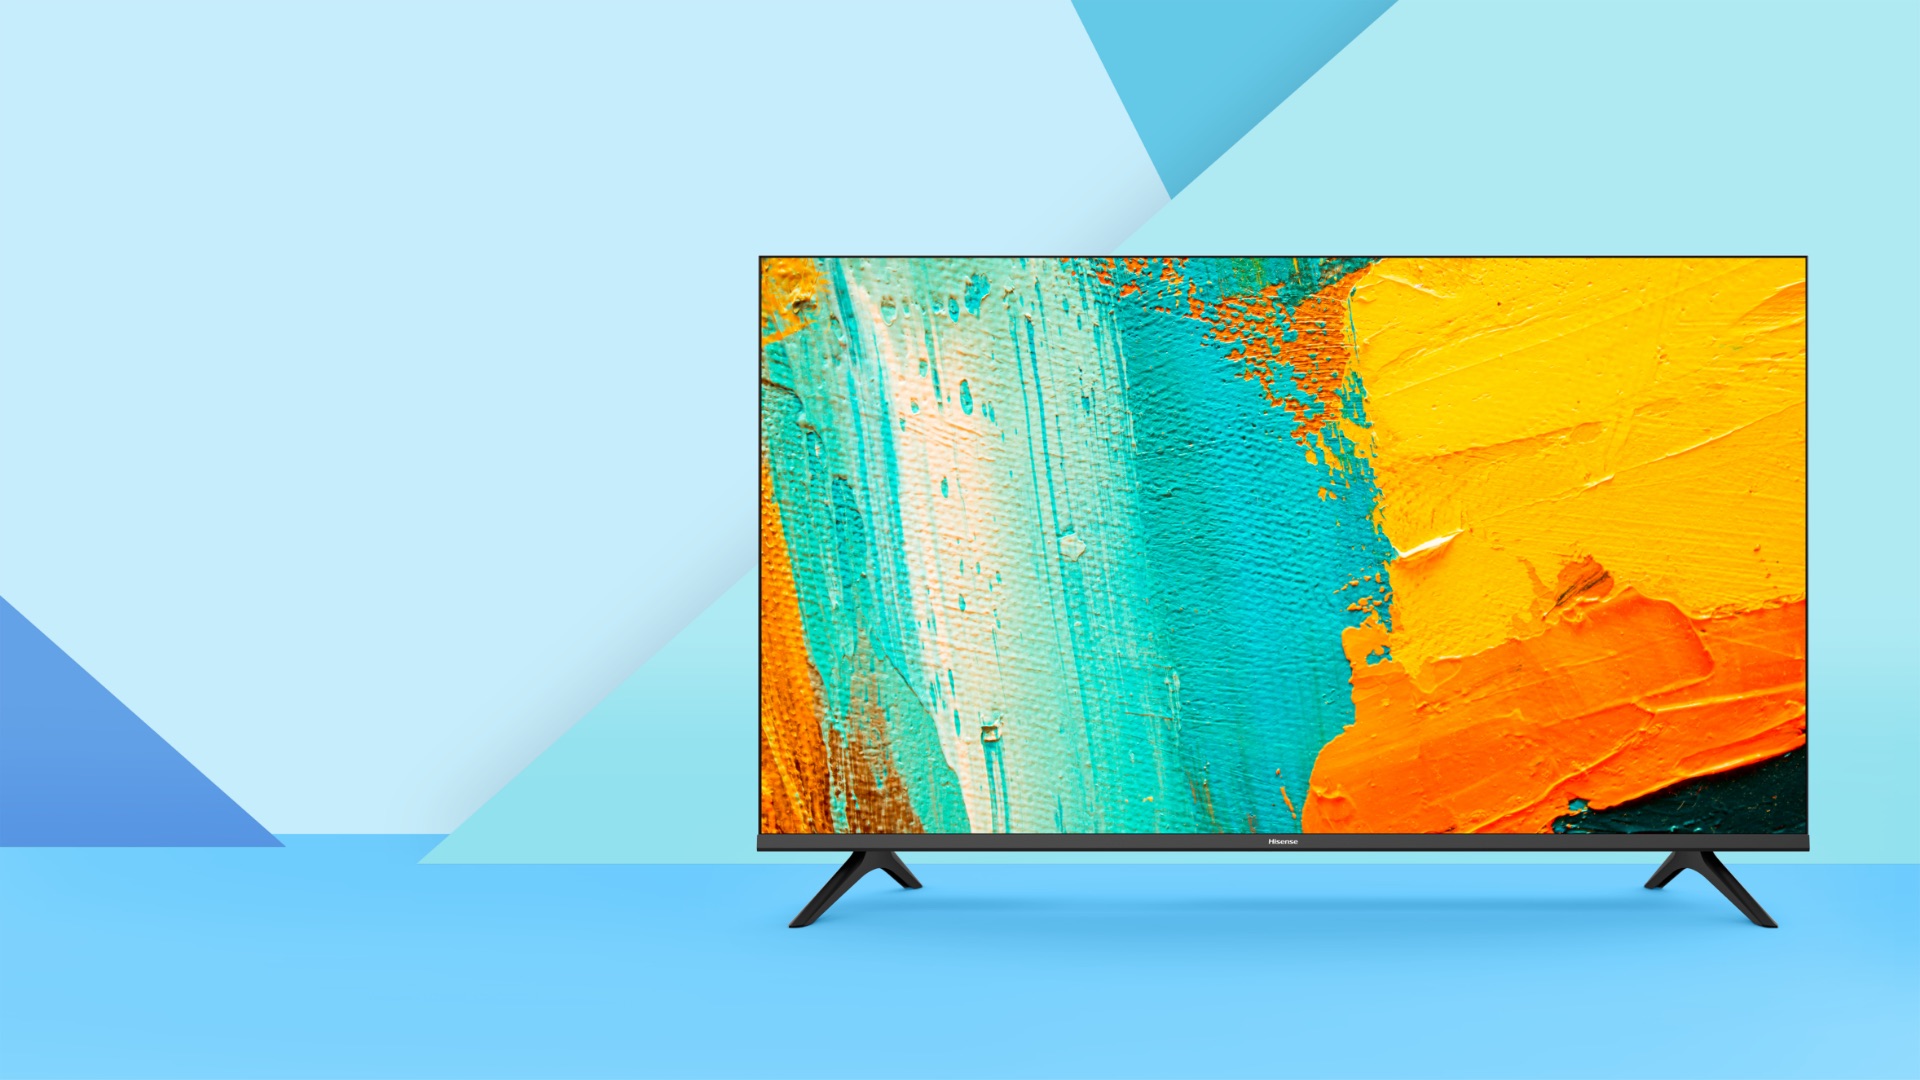 Image of the Hisense A4G Series Smart FHD TV with VIDAA OS and DTS, featuring its sleek design, vibrant display, and advanced features.